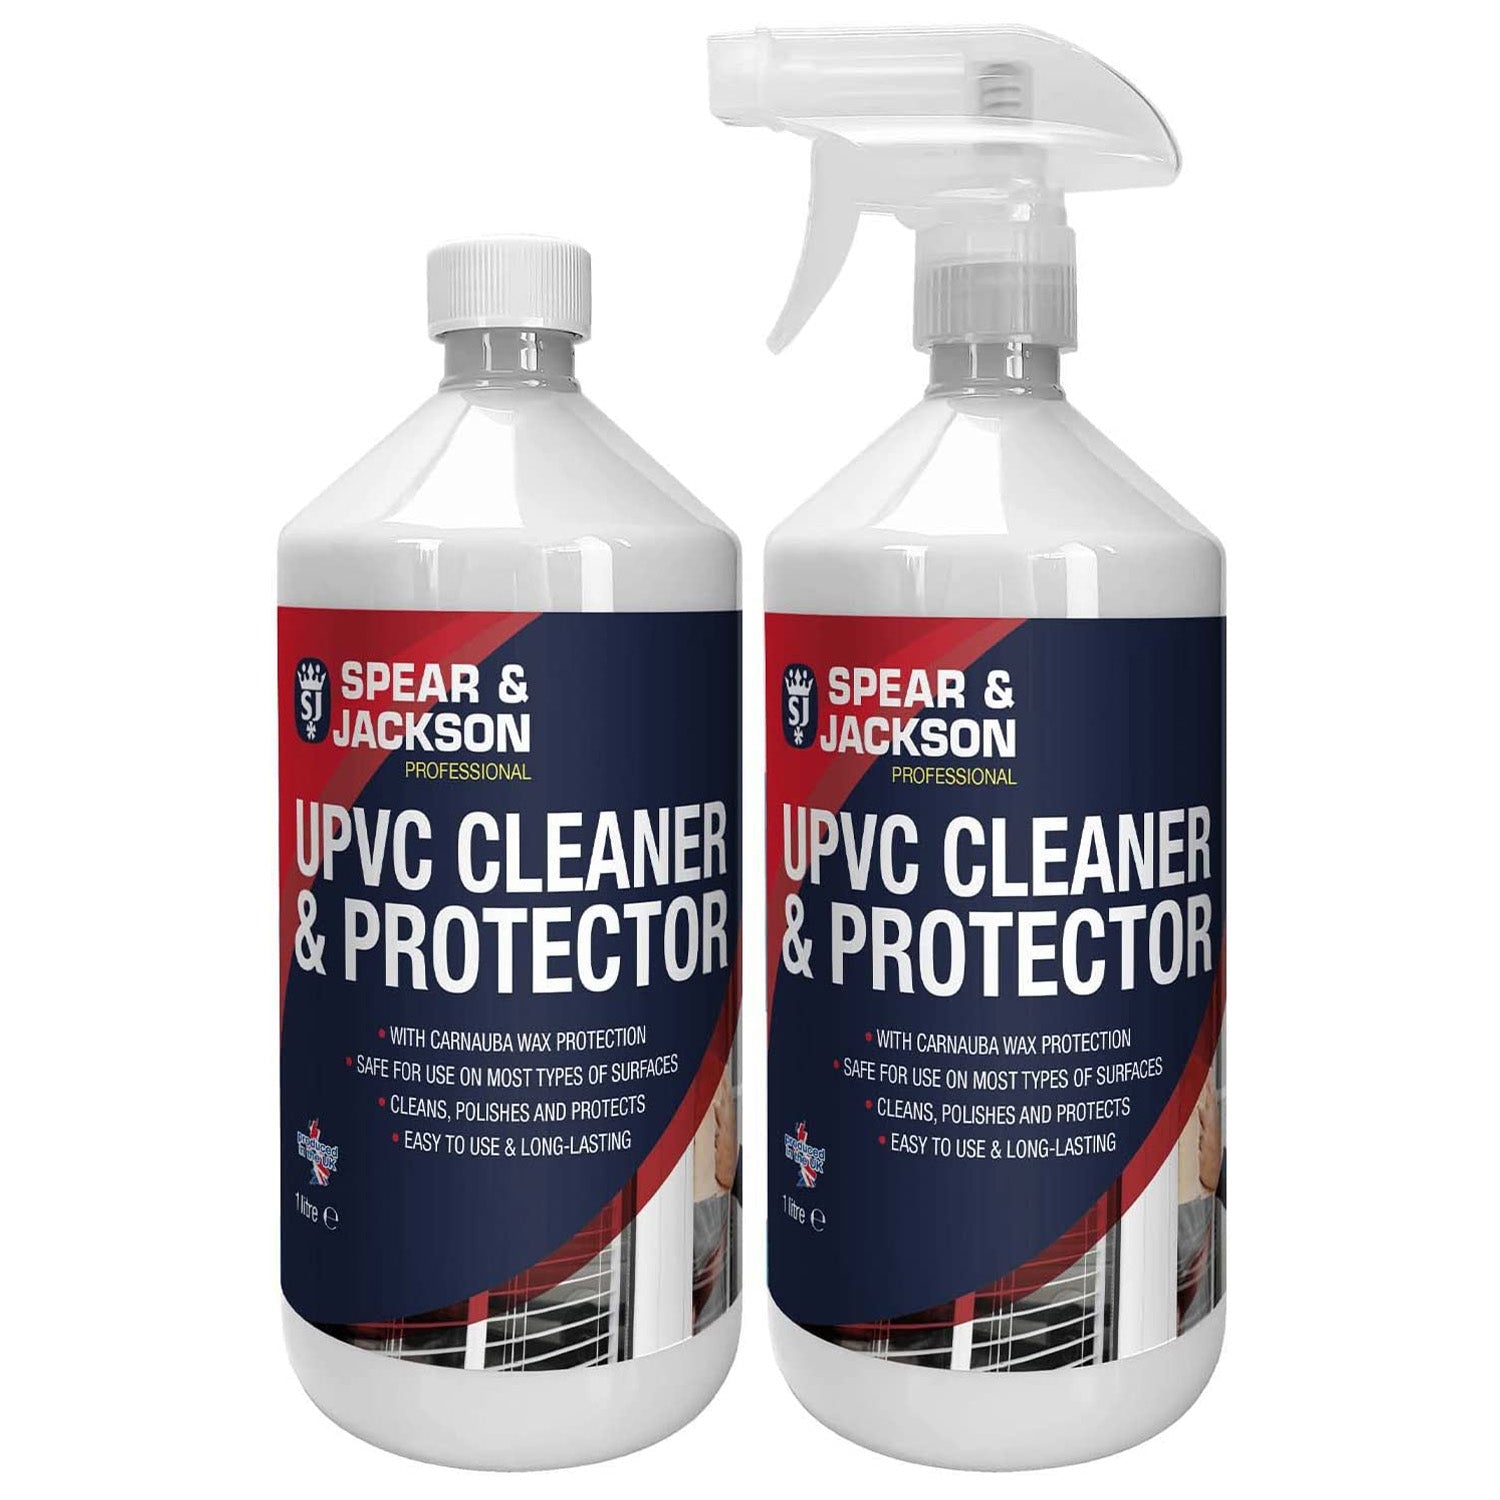 S&J UPVC Cleaner & Protector 2 x 1L